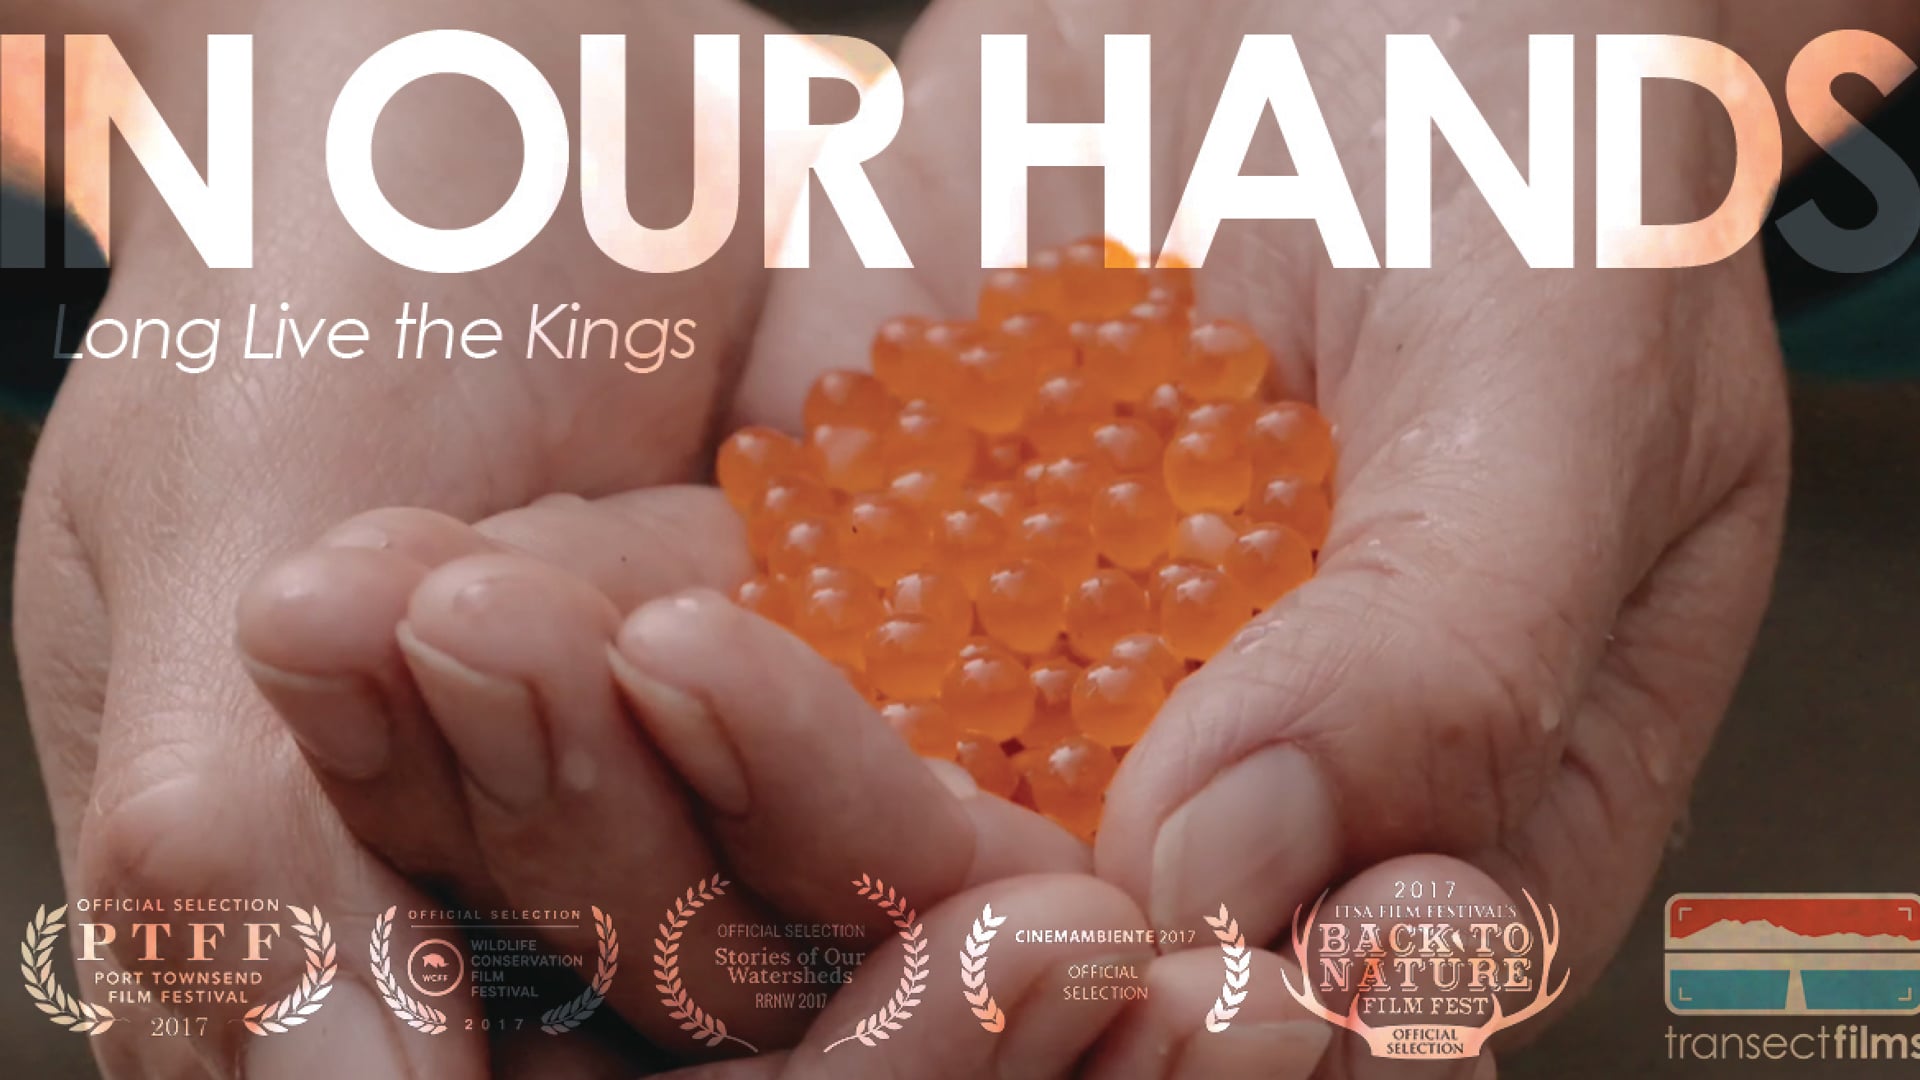 Long Live the Kings - In Our Hands